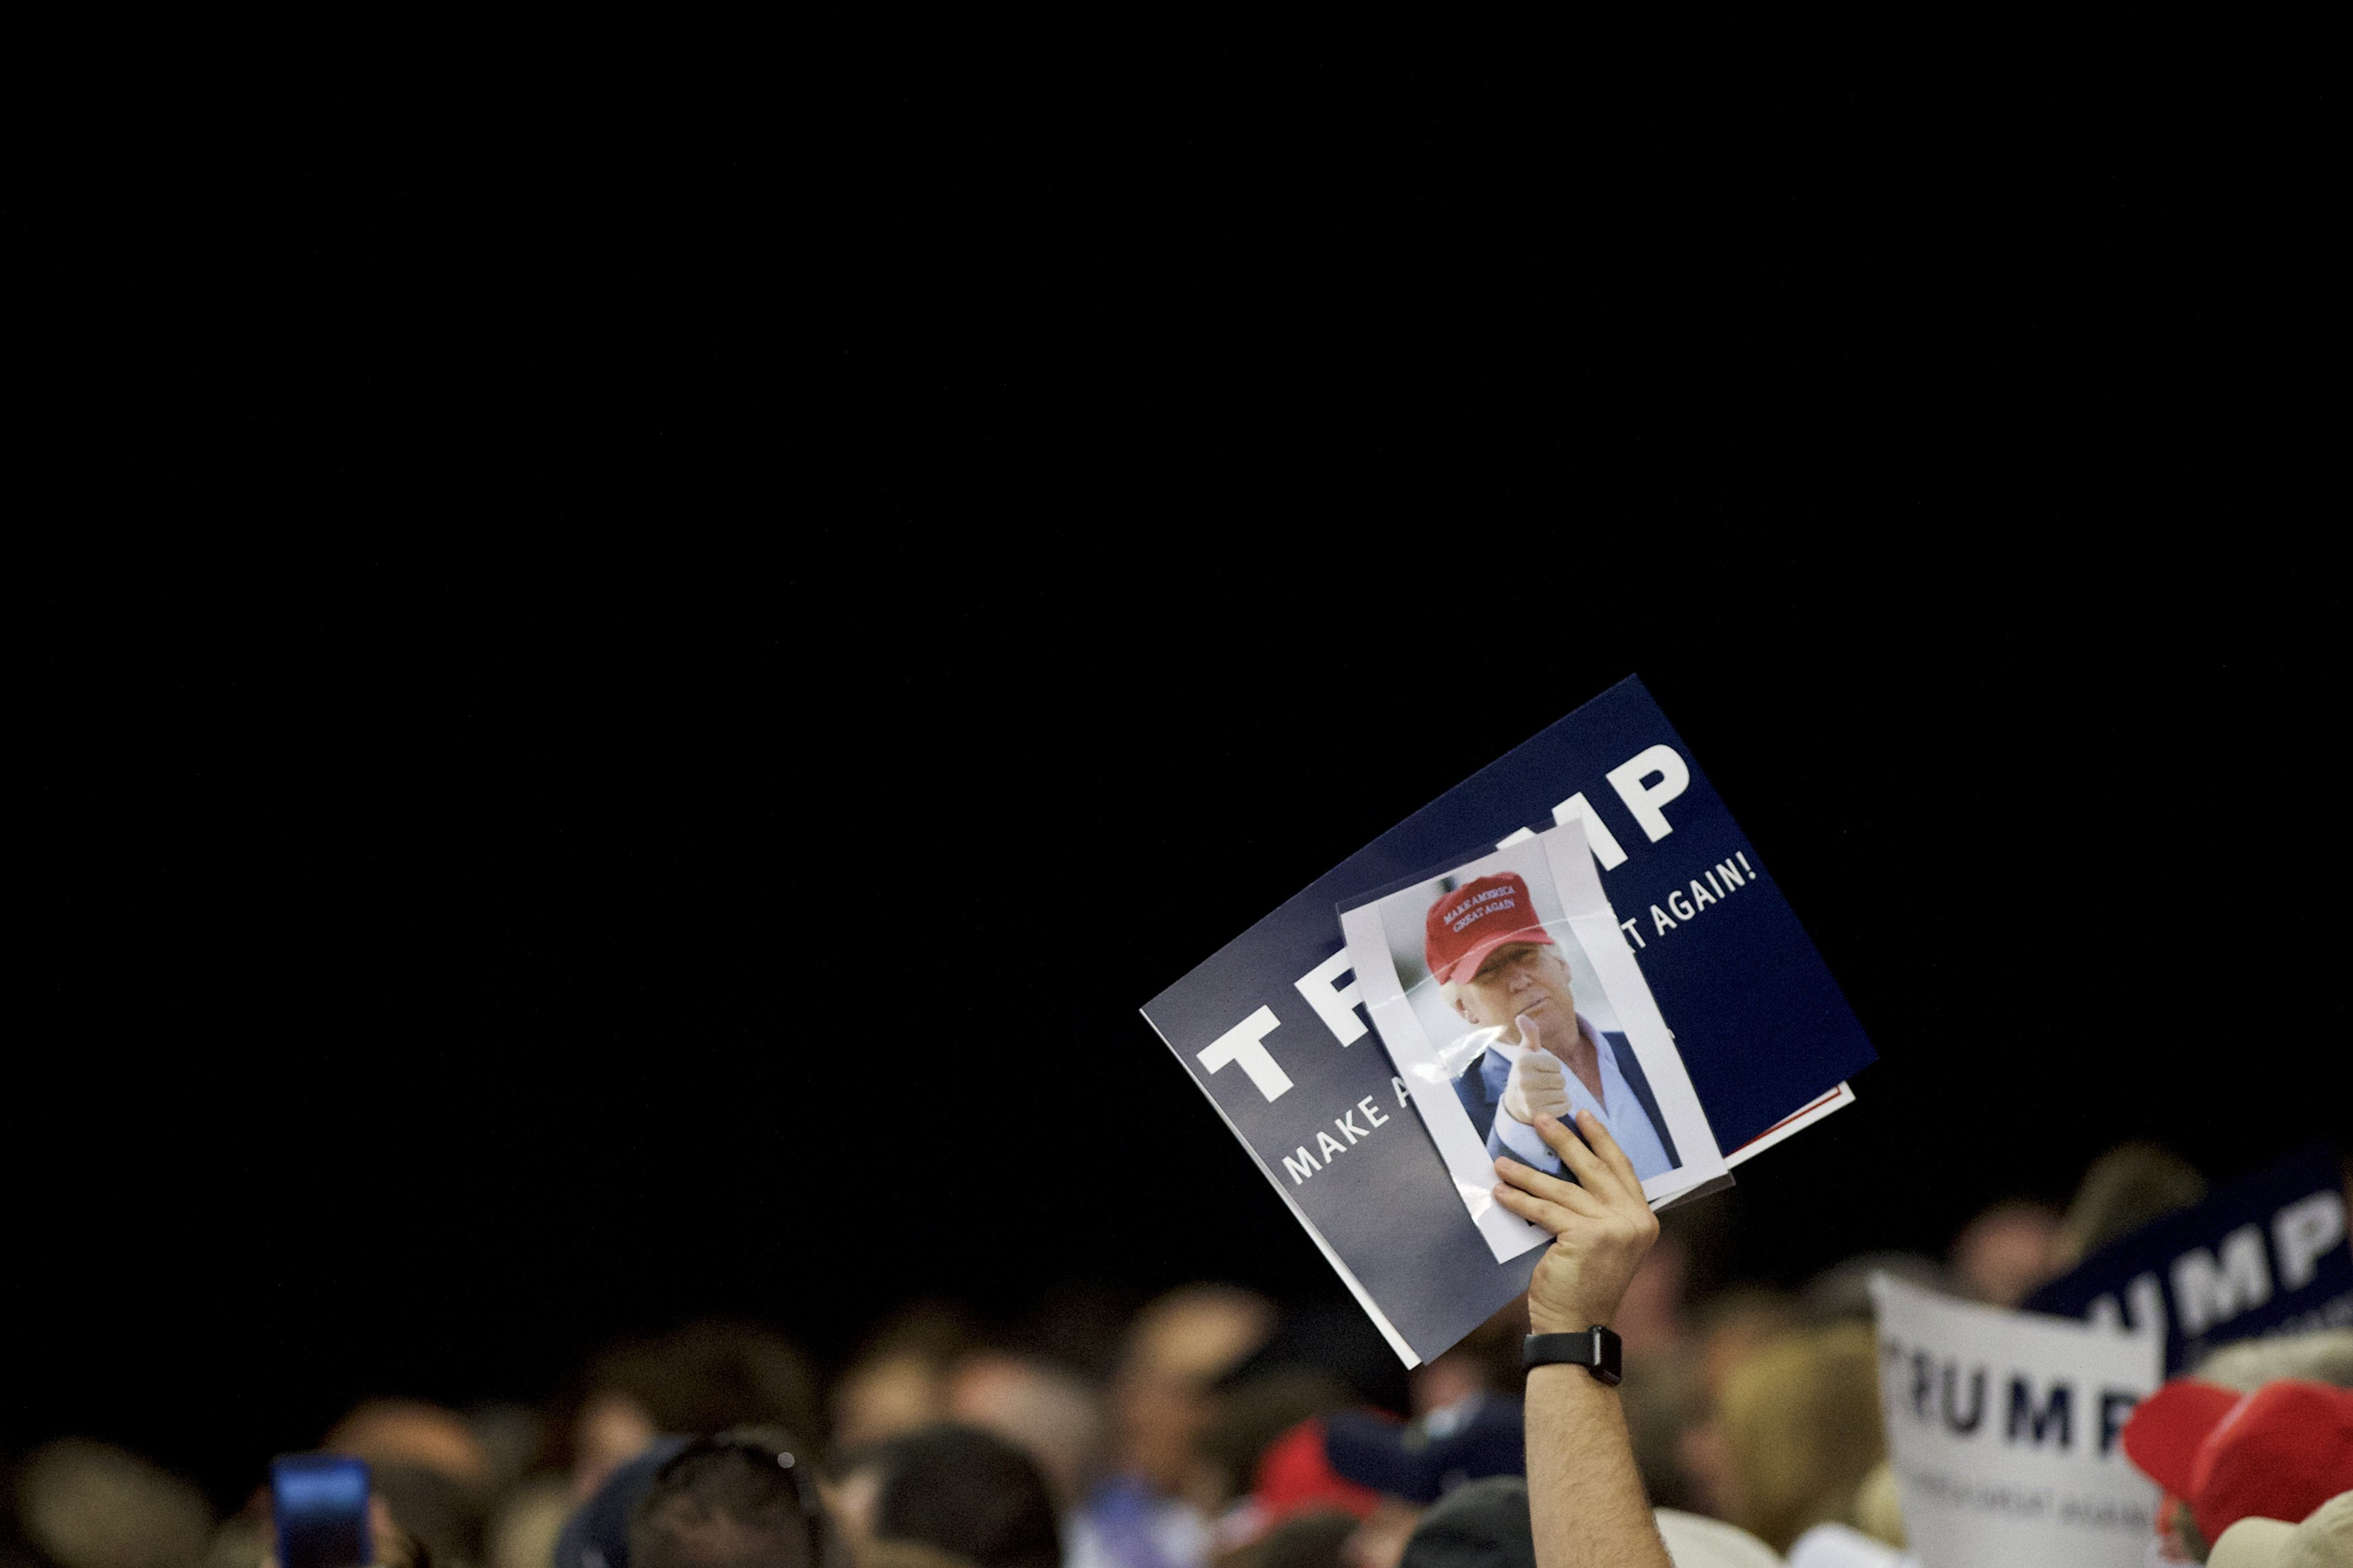 A Donald Trump supporter during a rally at the Pennsylvania Farm Show Complex &amp; Expo Center in Harrisburg, Pa., on April 21, 2016. (Mark Makela—Getty Images)